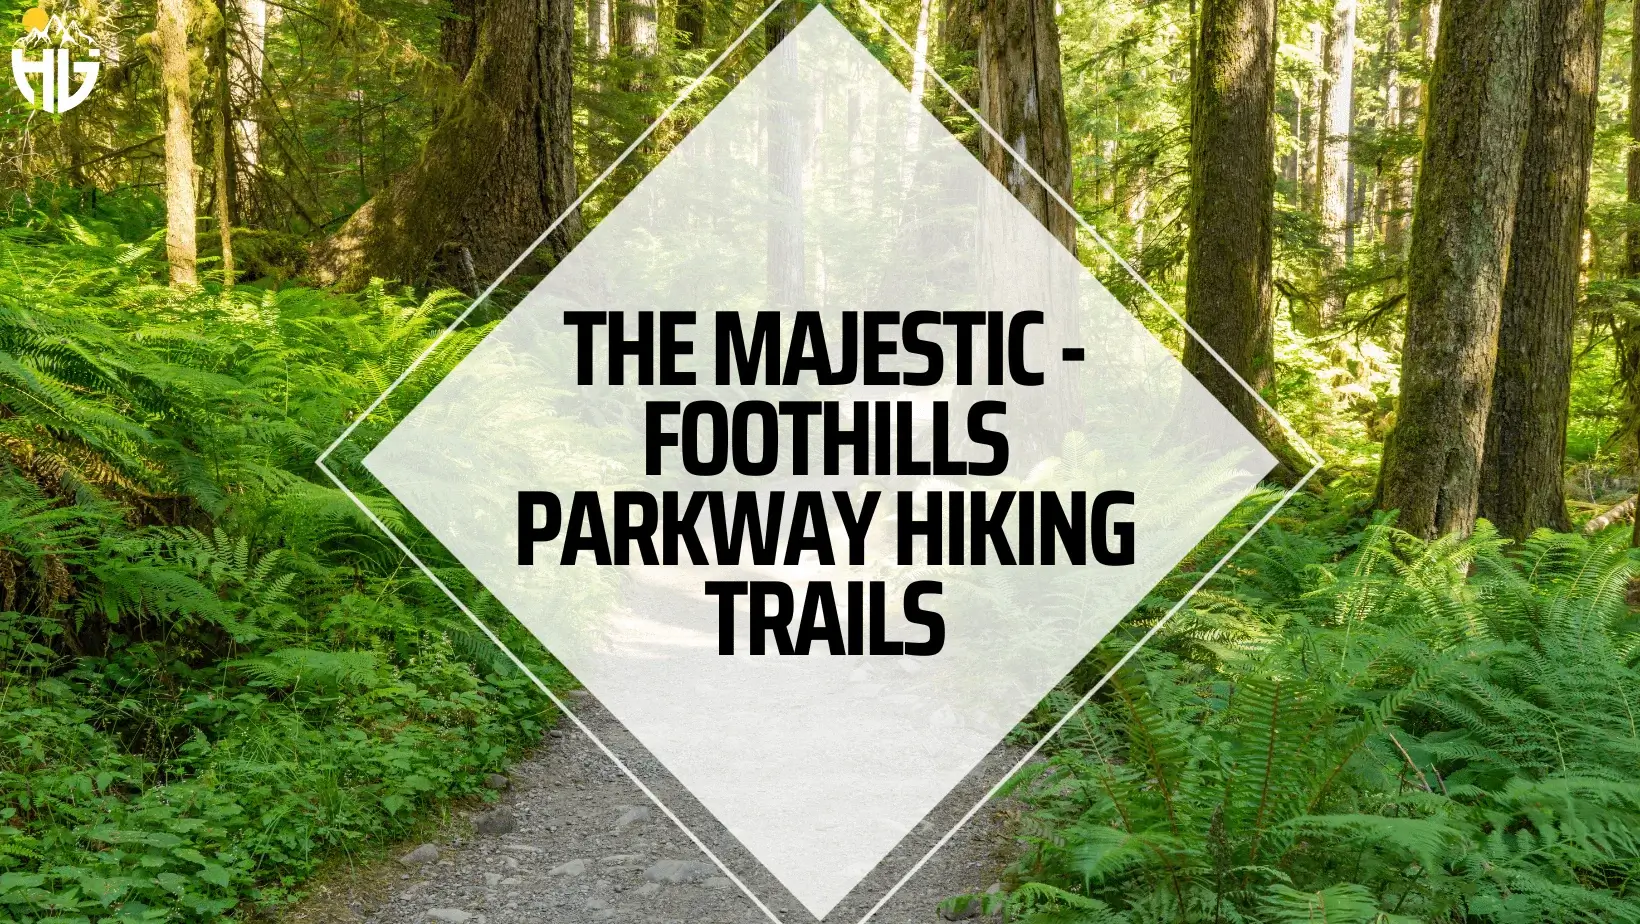 The Majestic - Foothills Parkway Hiking Trails